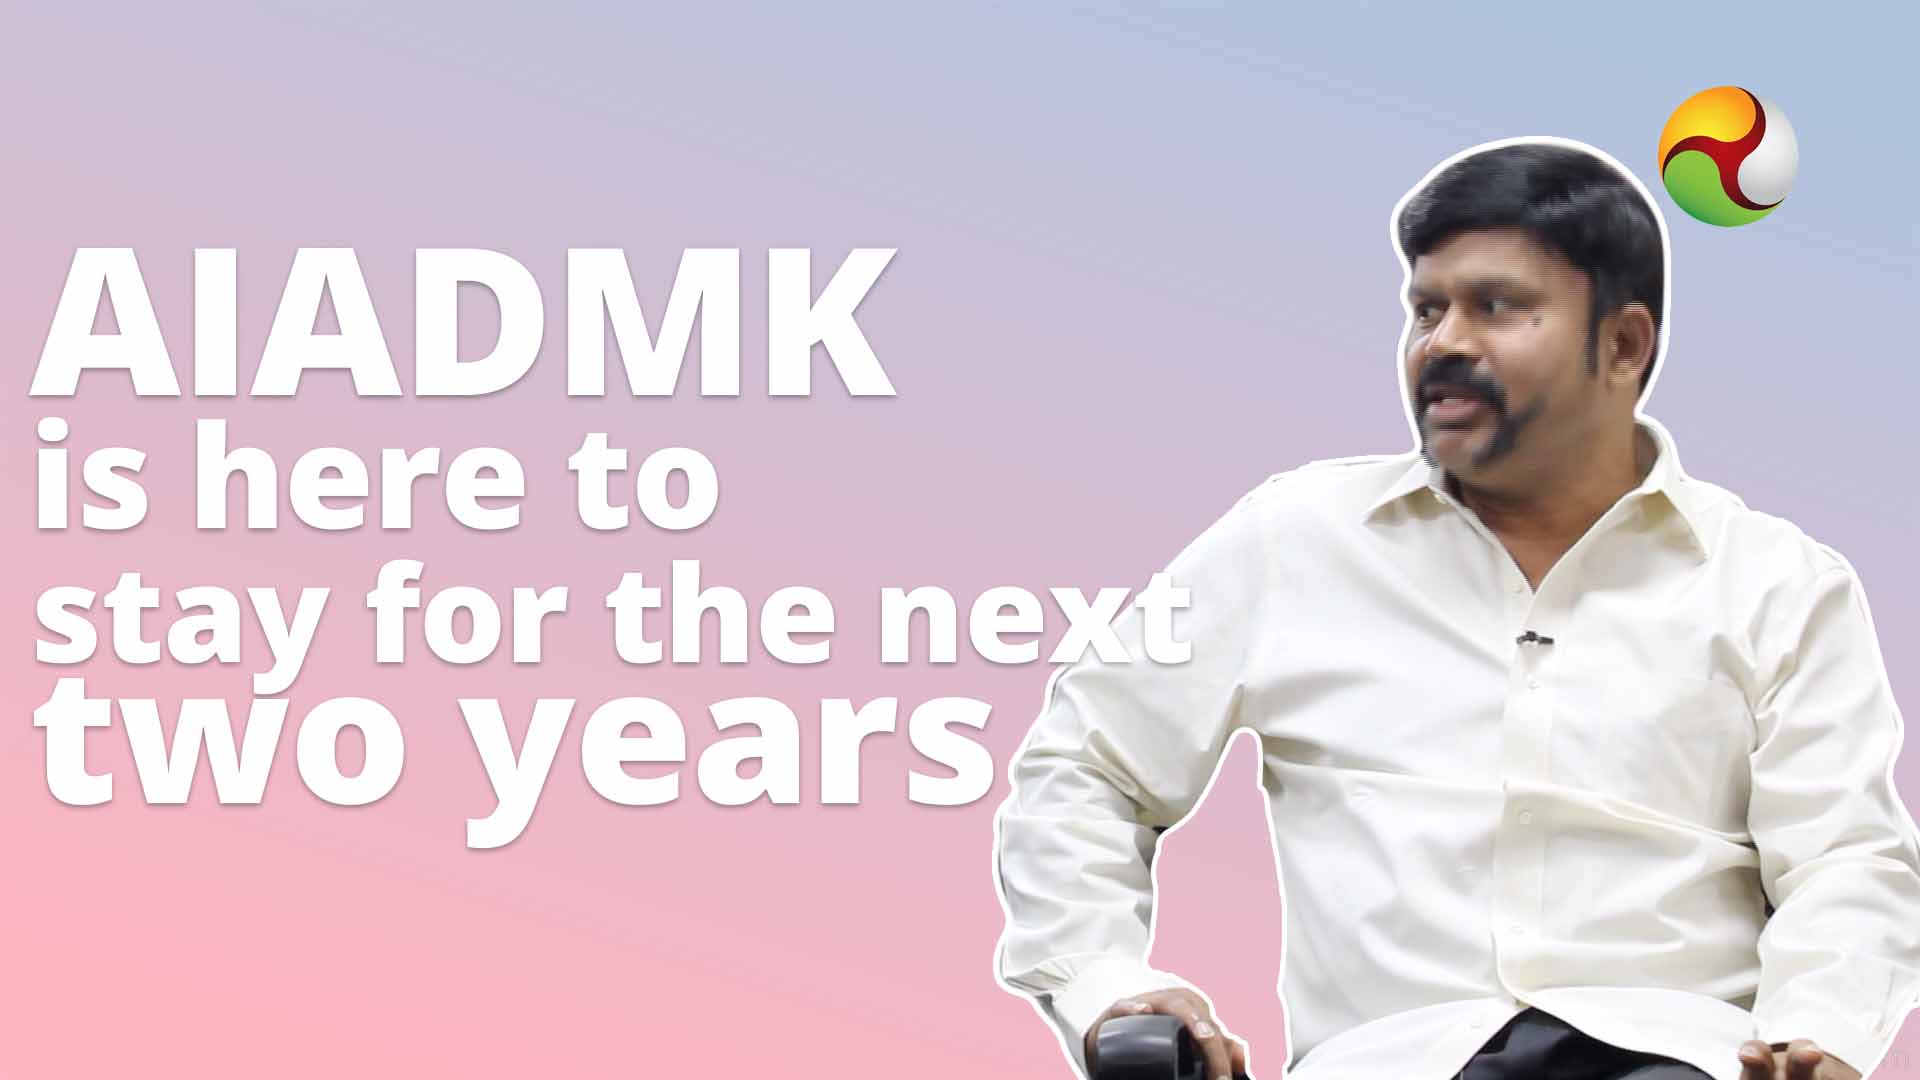 AIADMK is here to stay for the next two years, says KC Palanisamy